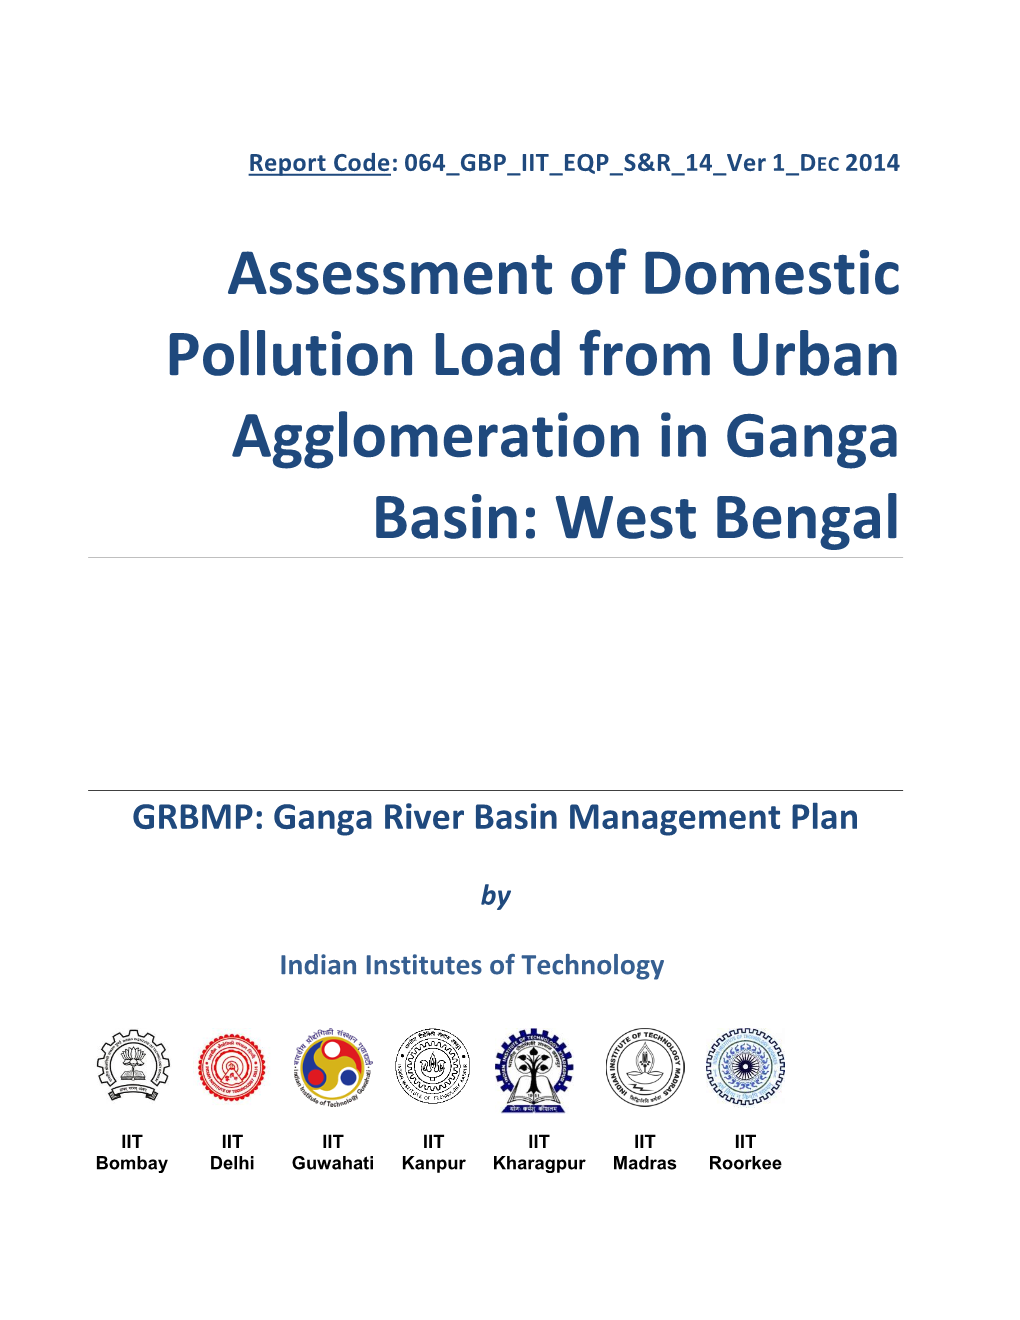 Assessment of Domestic Pollution Load from Urban Agglomeration in Ganga Basin: West Bengal